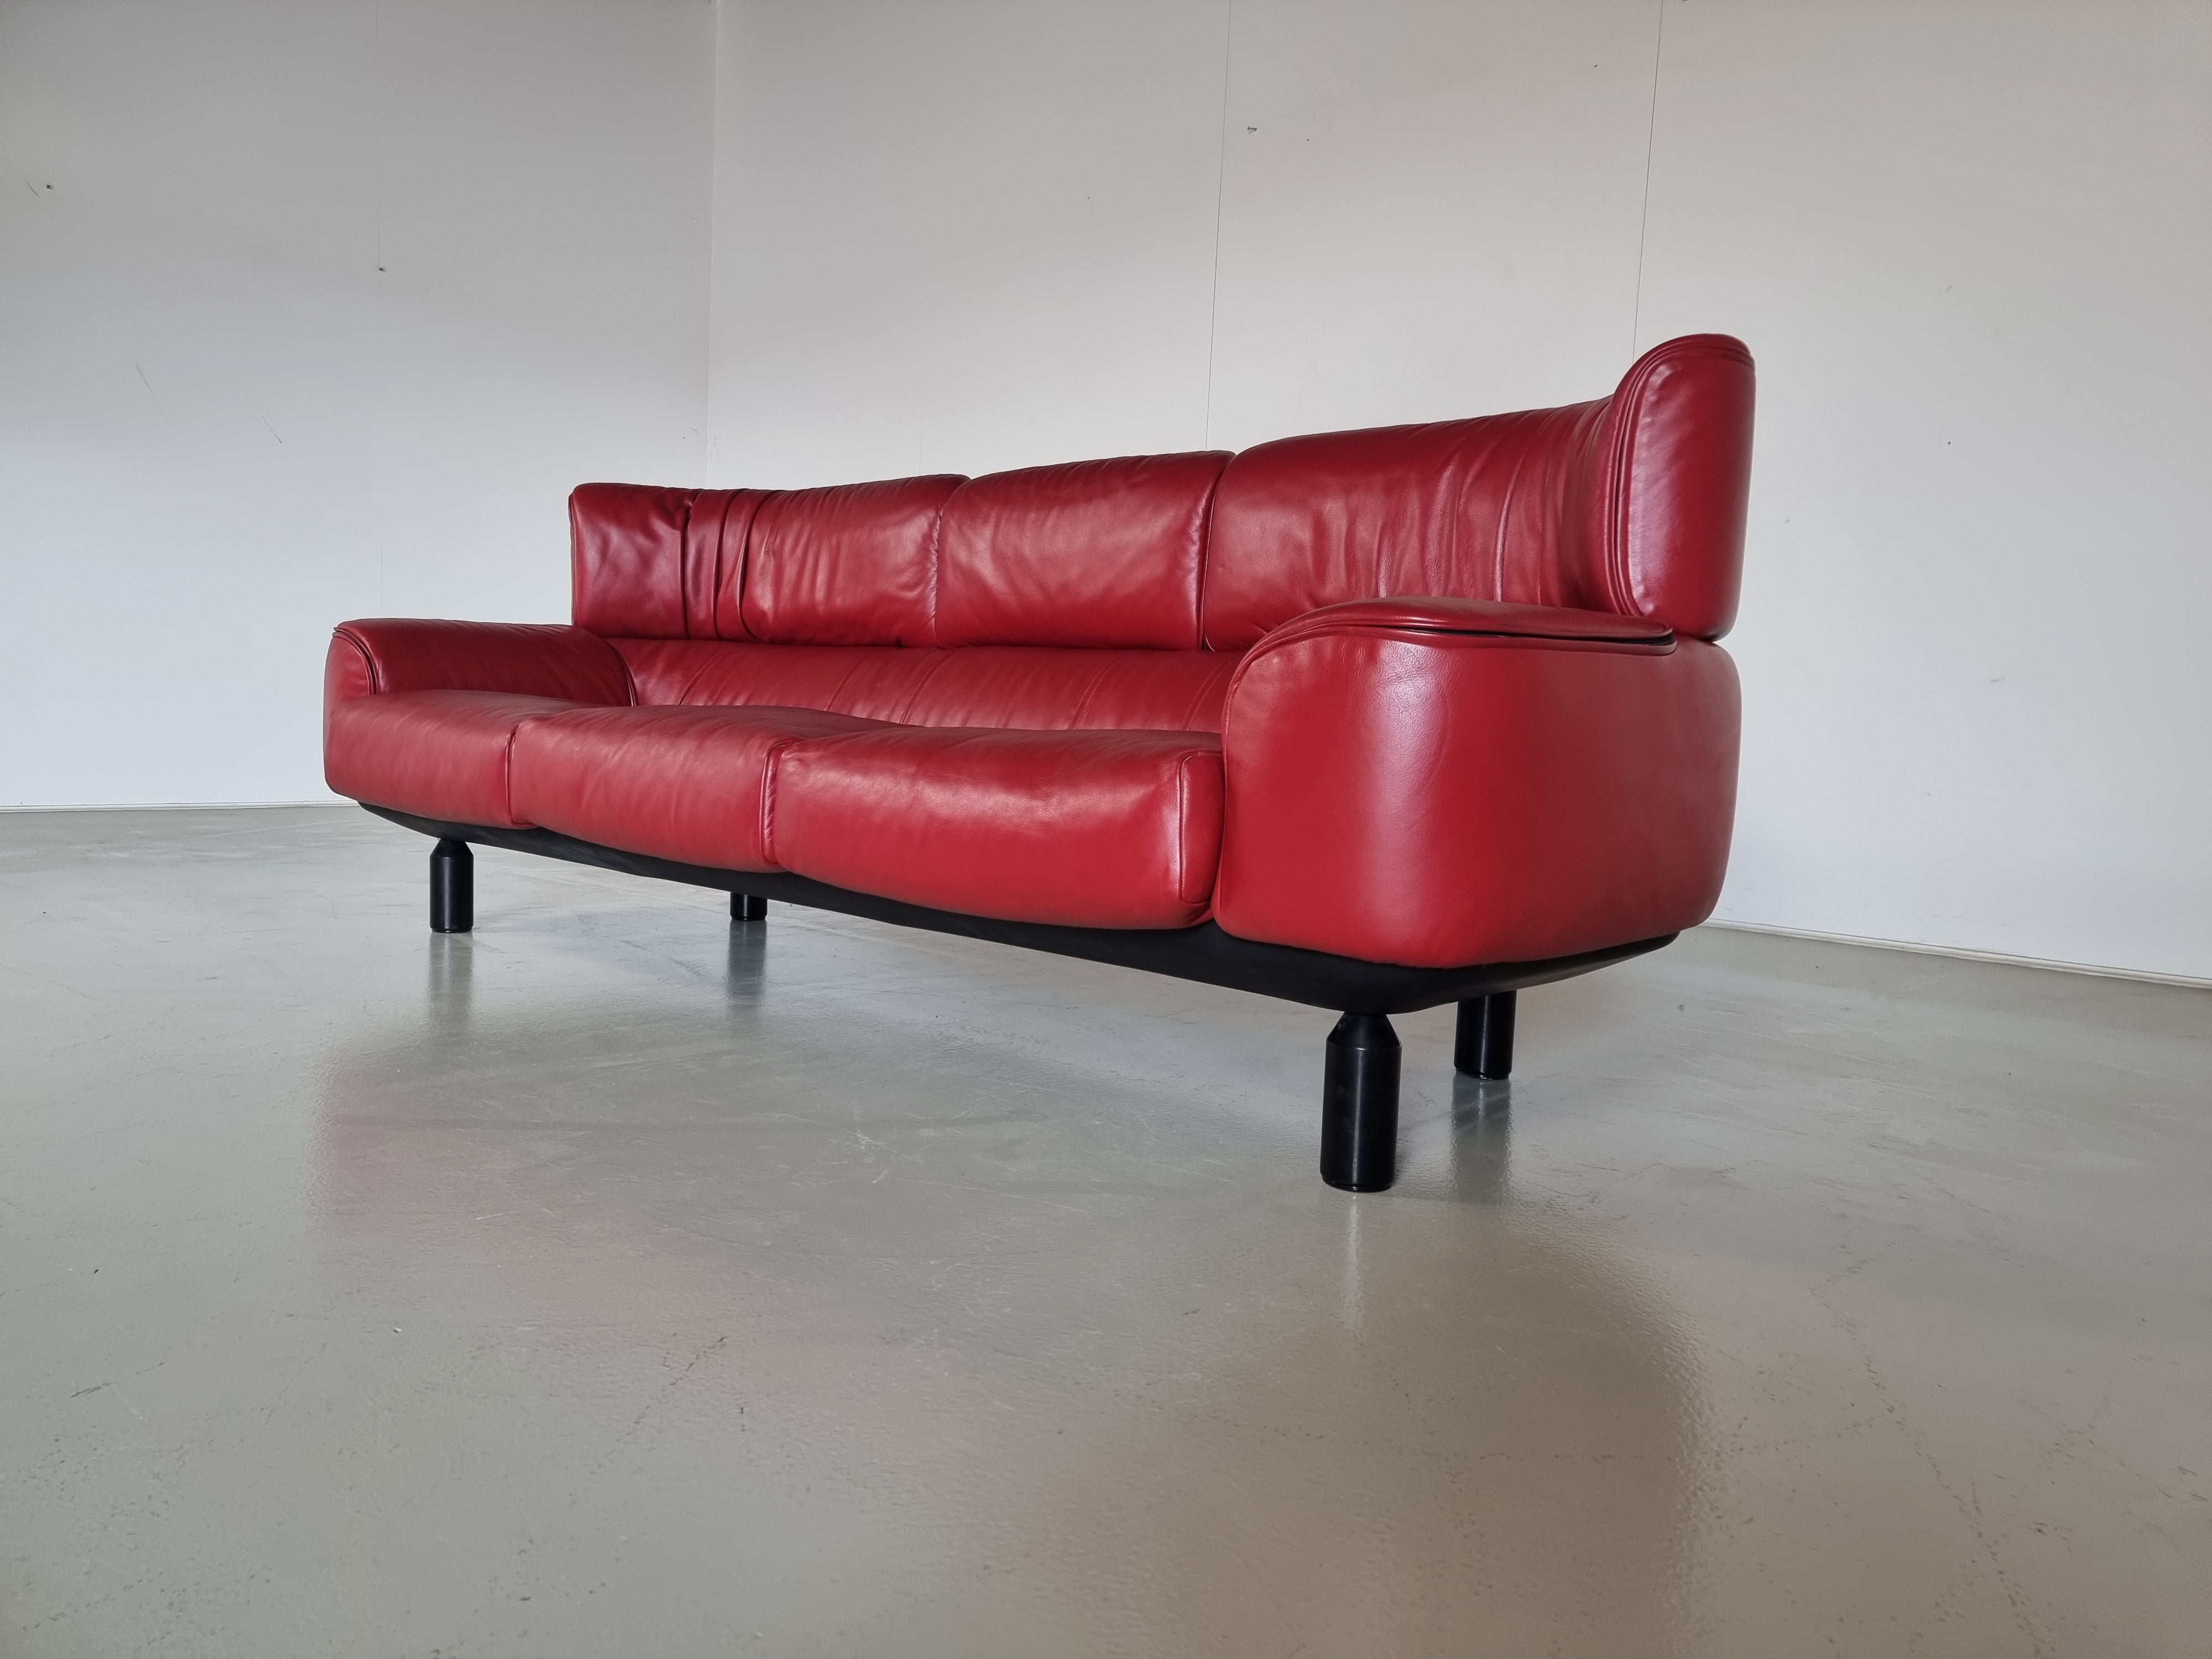 Spectacular and extremely rare 3 seater Bull sofa designed by Gianfranco Frattini and manufactured by Cassina, Italy 1987. This sofa is no longer in production and was only produced for 1 year. Documented in the famous Italian Reportorio book. Its